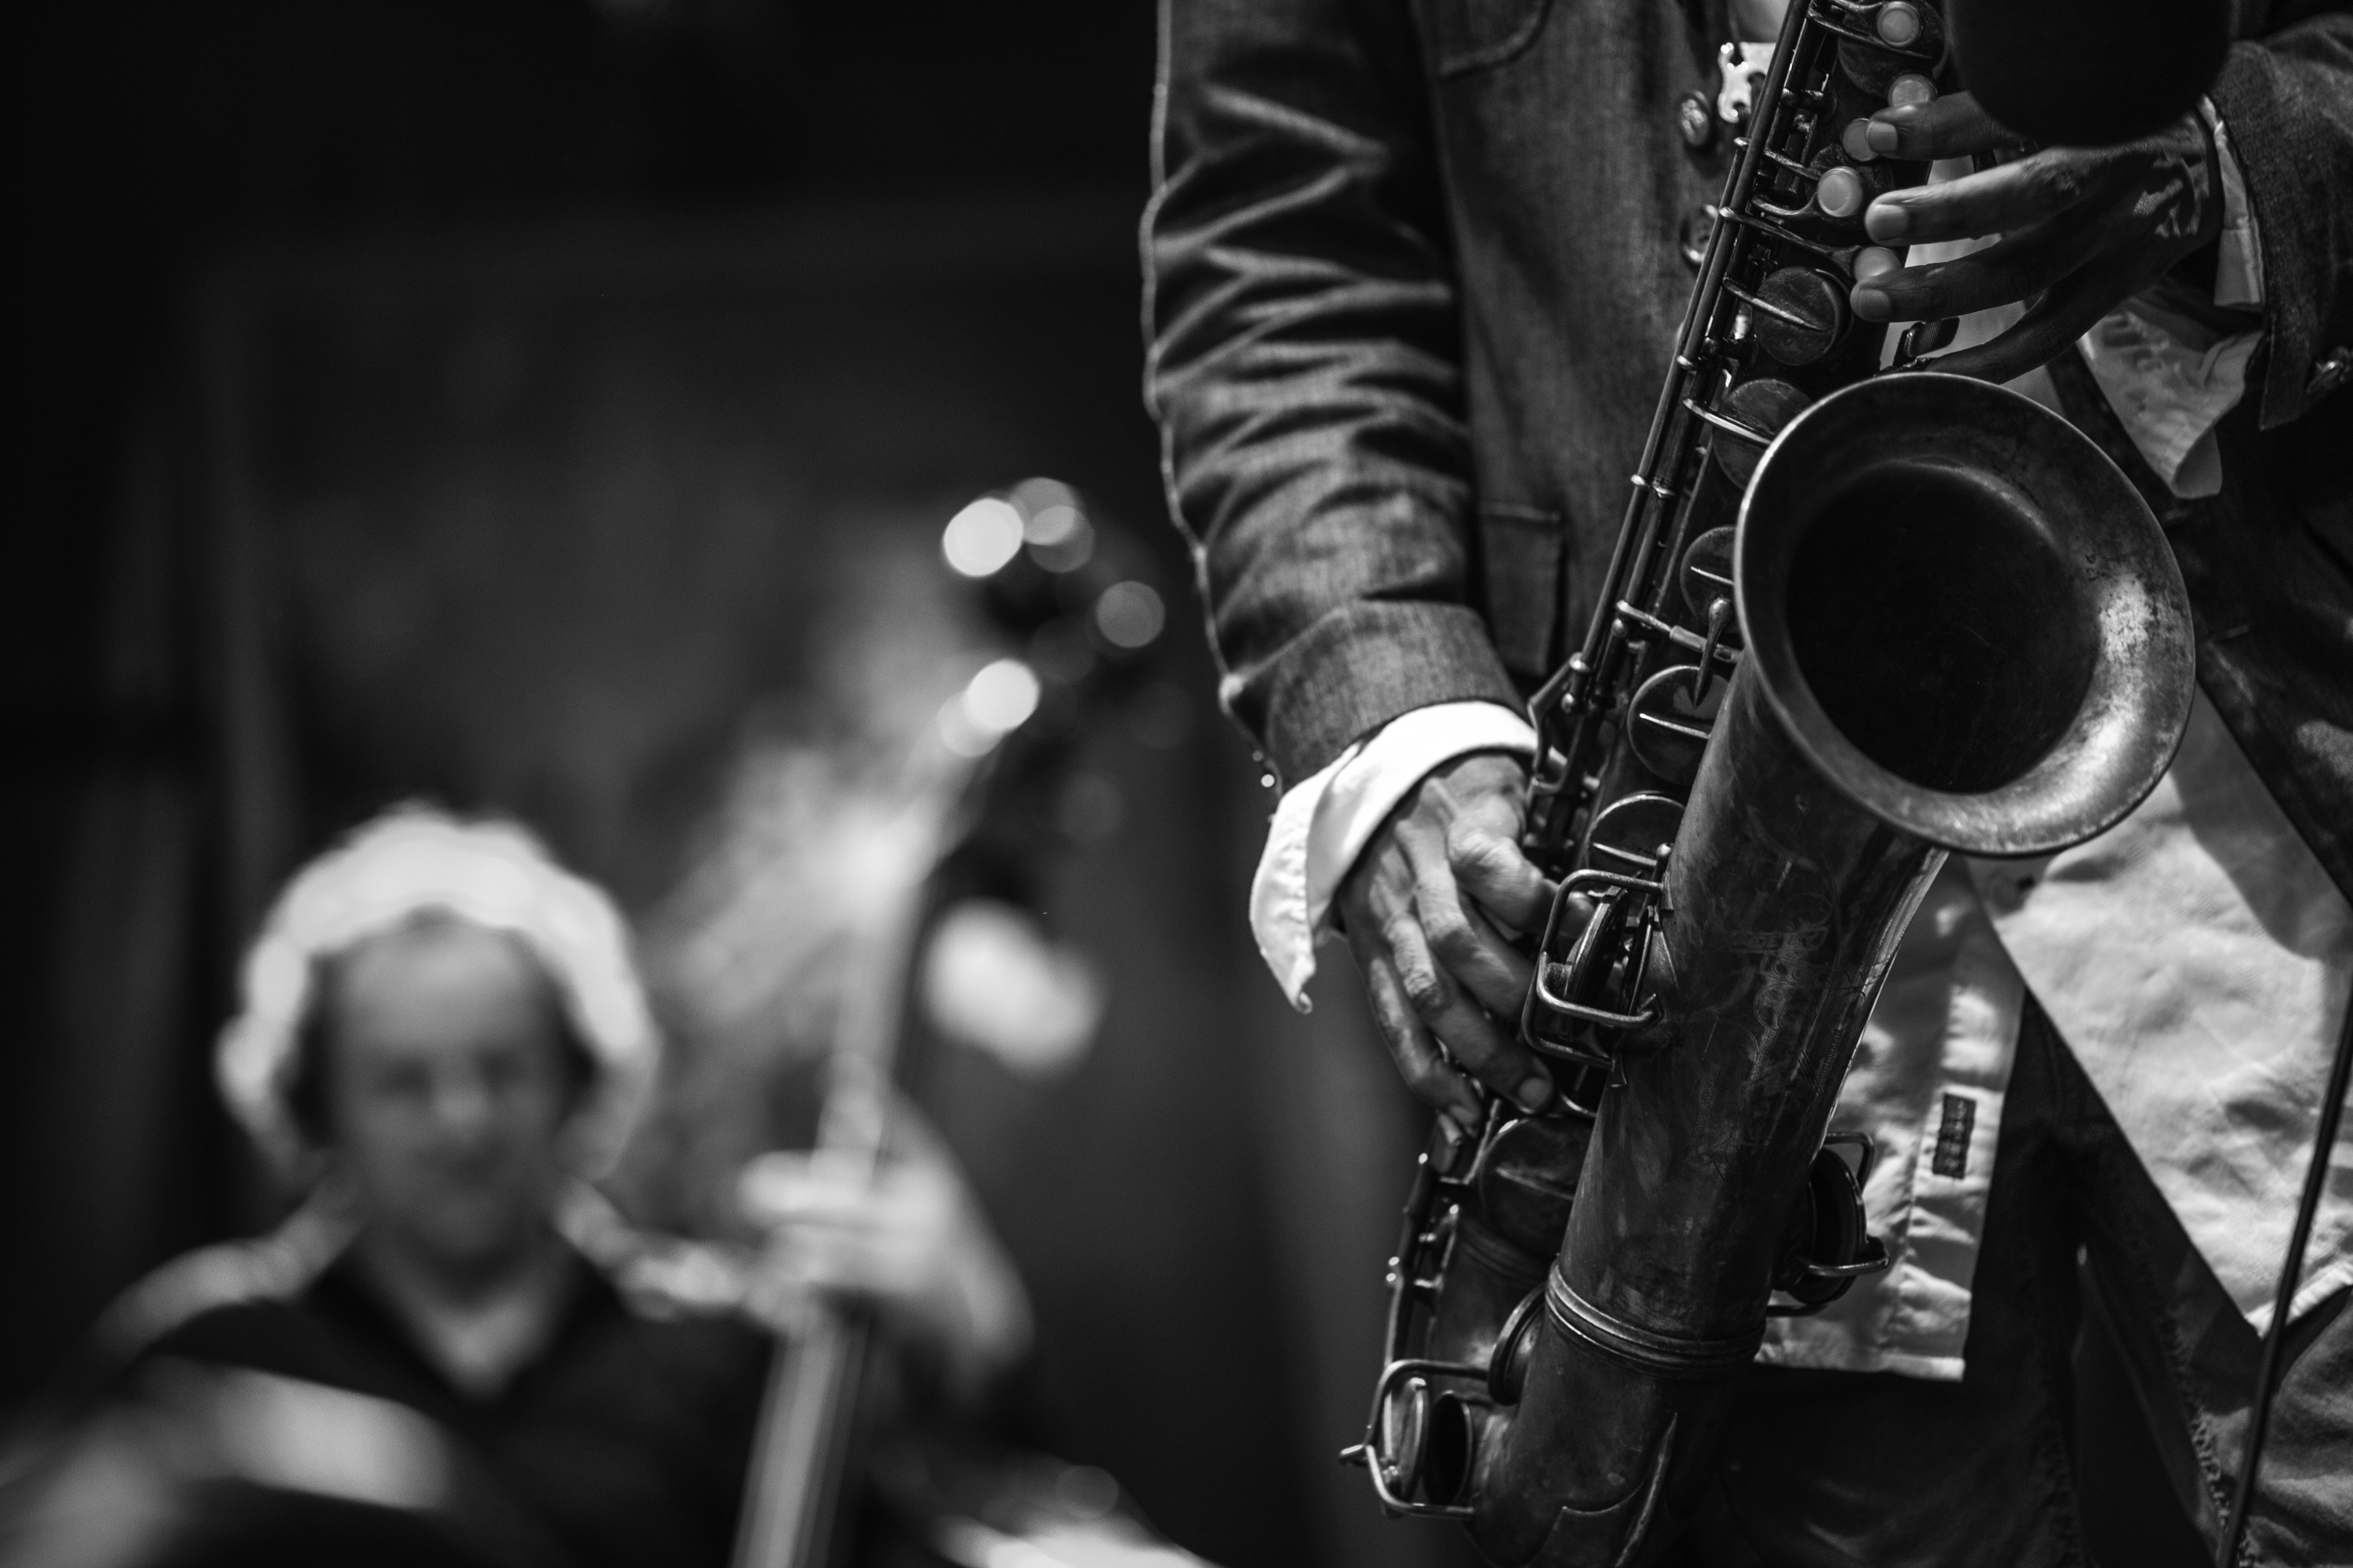 An individual plays the saxophone, all the image shows is the saxophone and an arm and hand on the keys with a string player in the background.